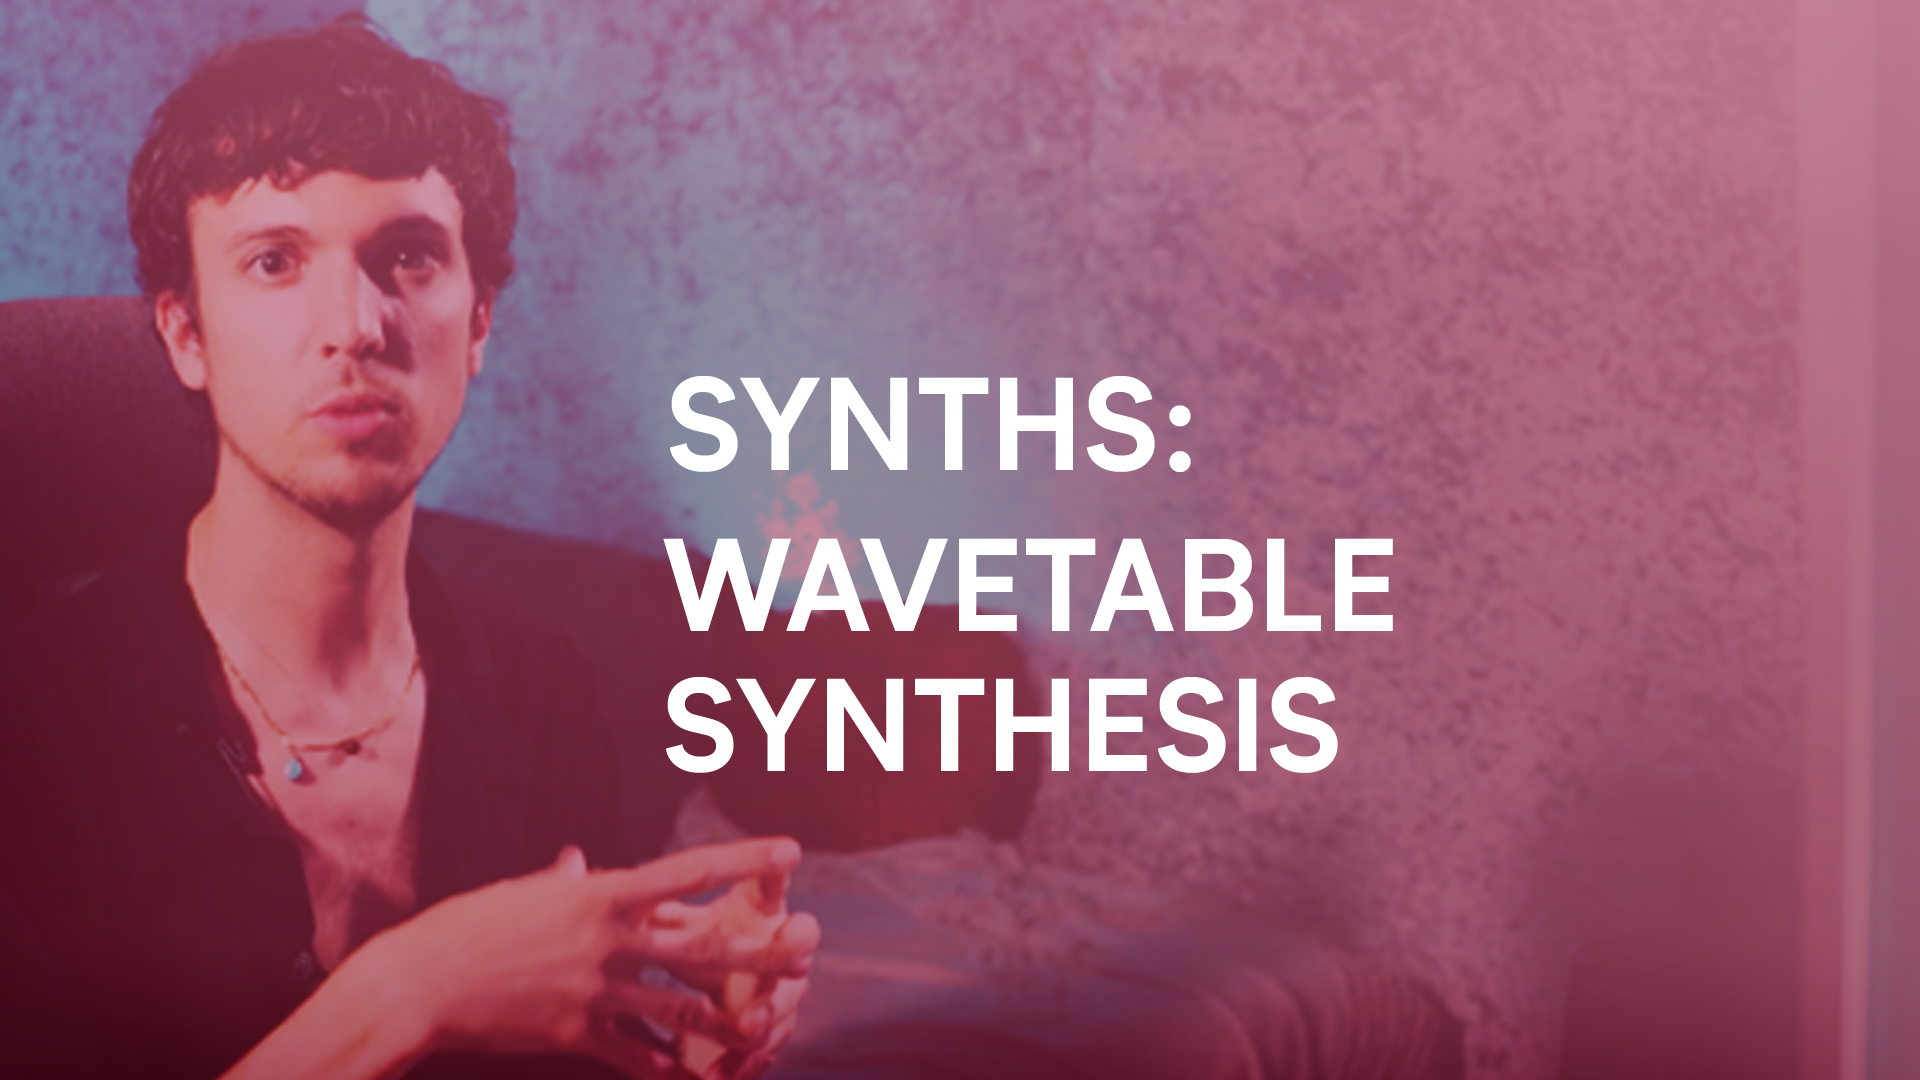 WAVETABLE SYNTHESIS